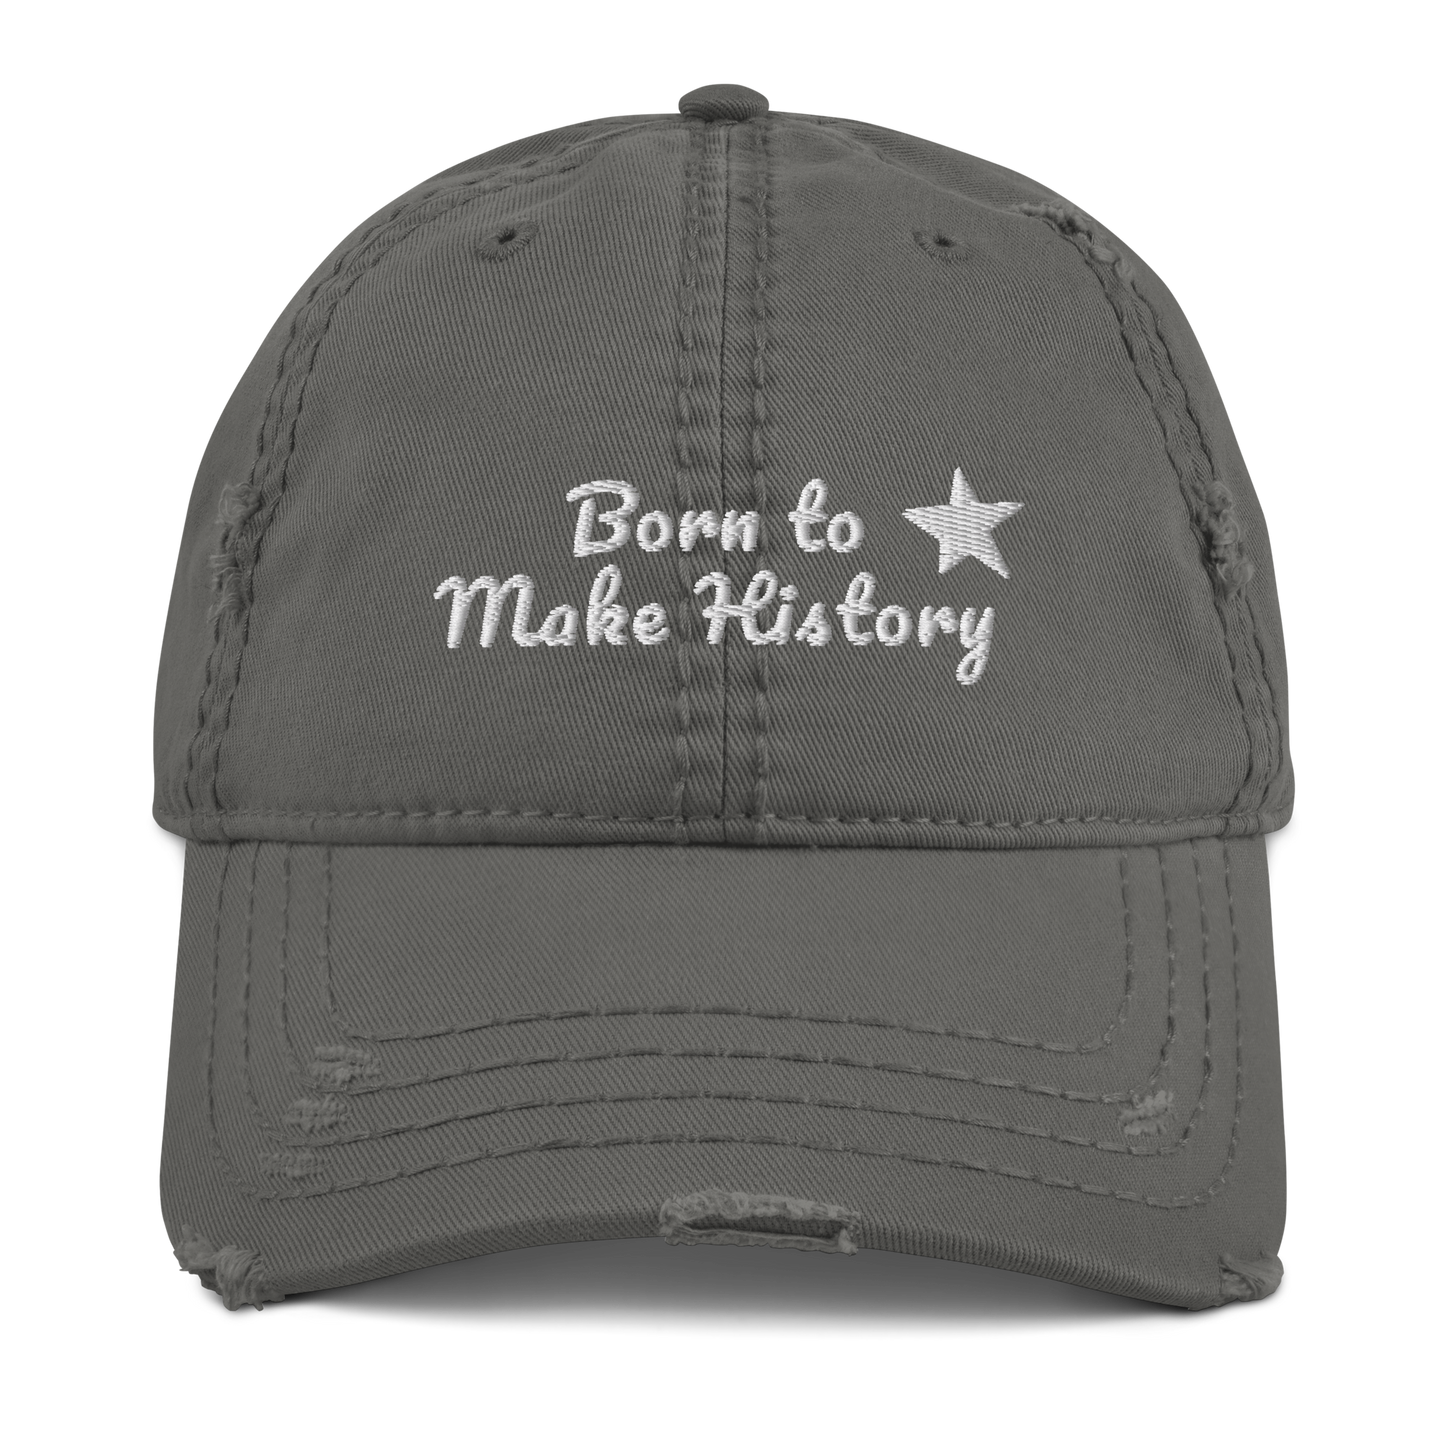 Born to Make History Cap (Embroidered)